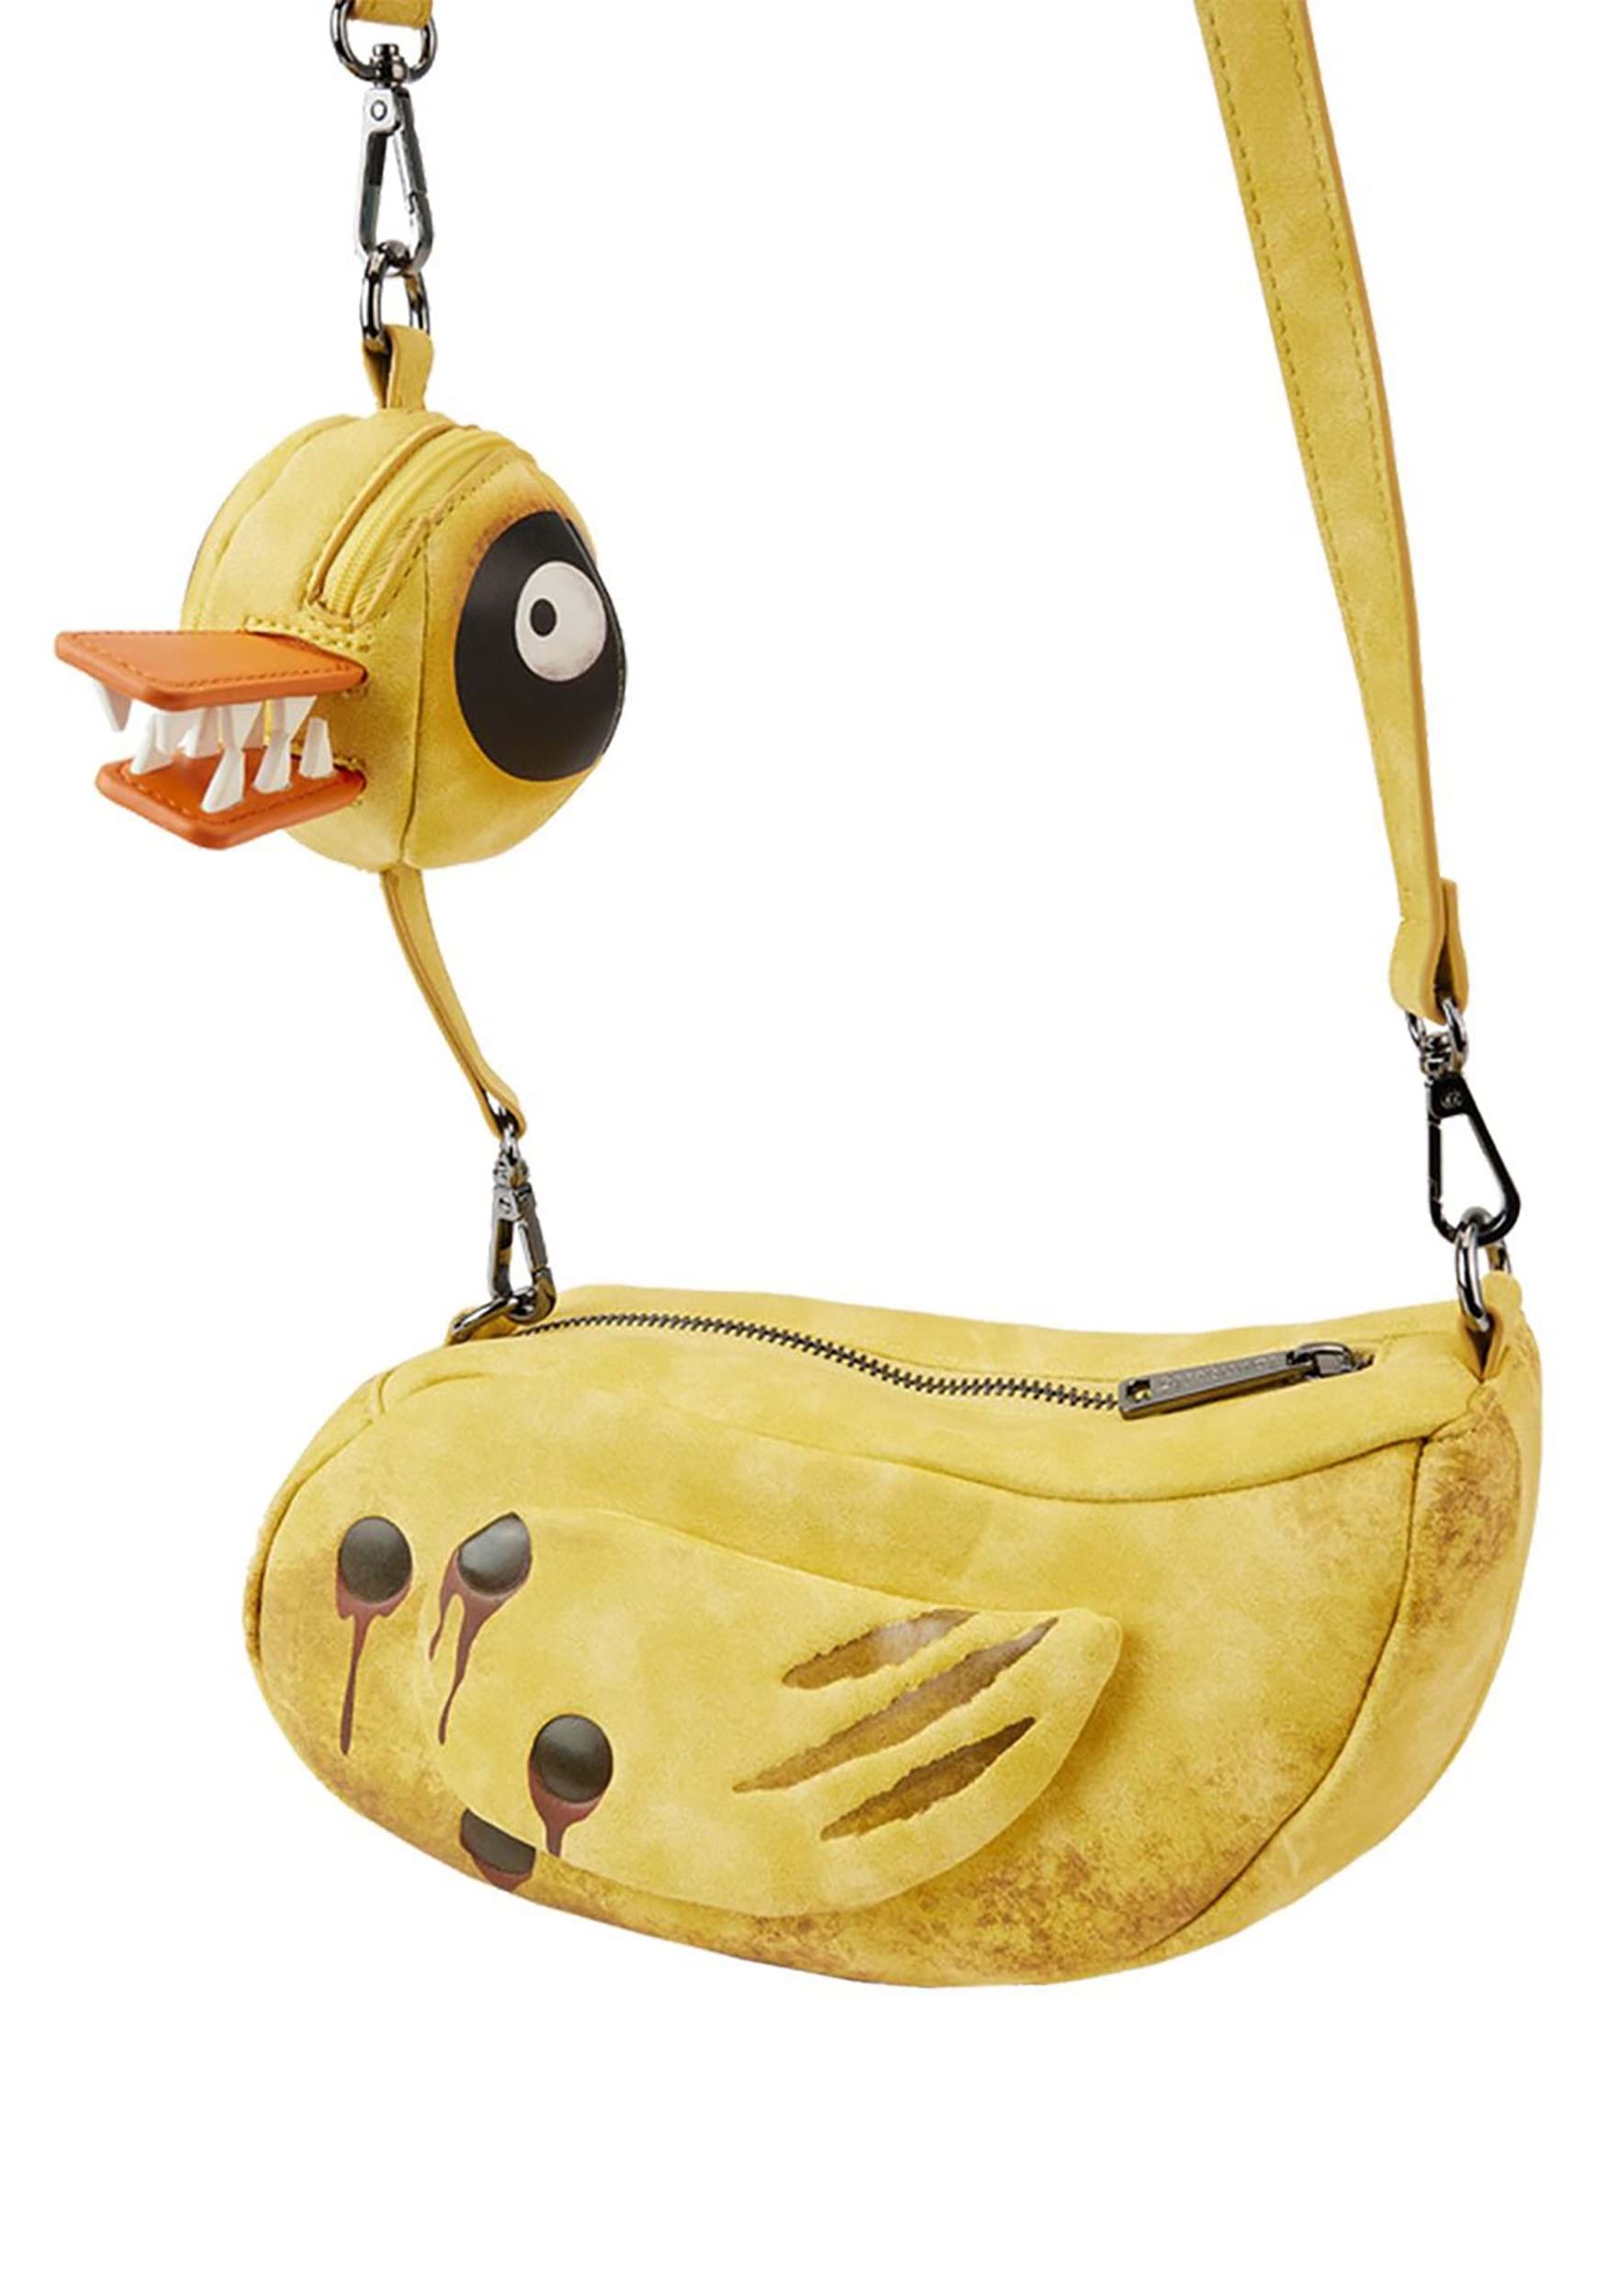 Nightmare Before Christmas Toy Duck Crossbody Bag by Loungefly